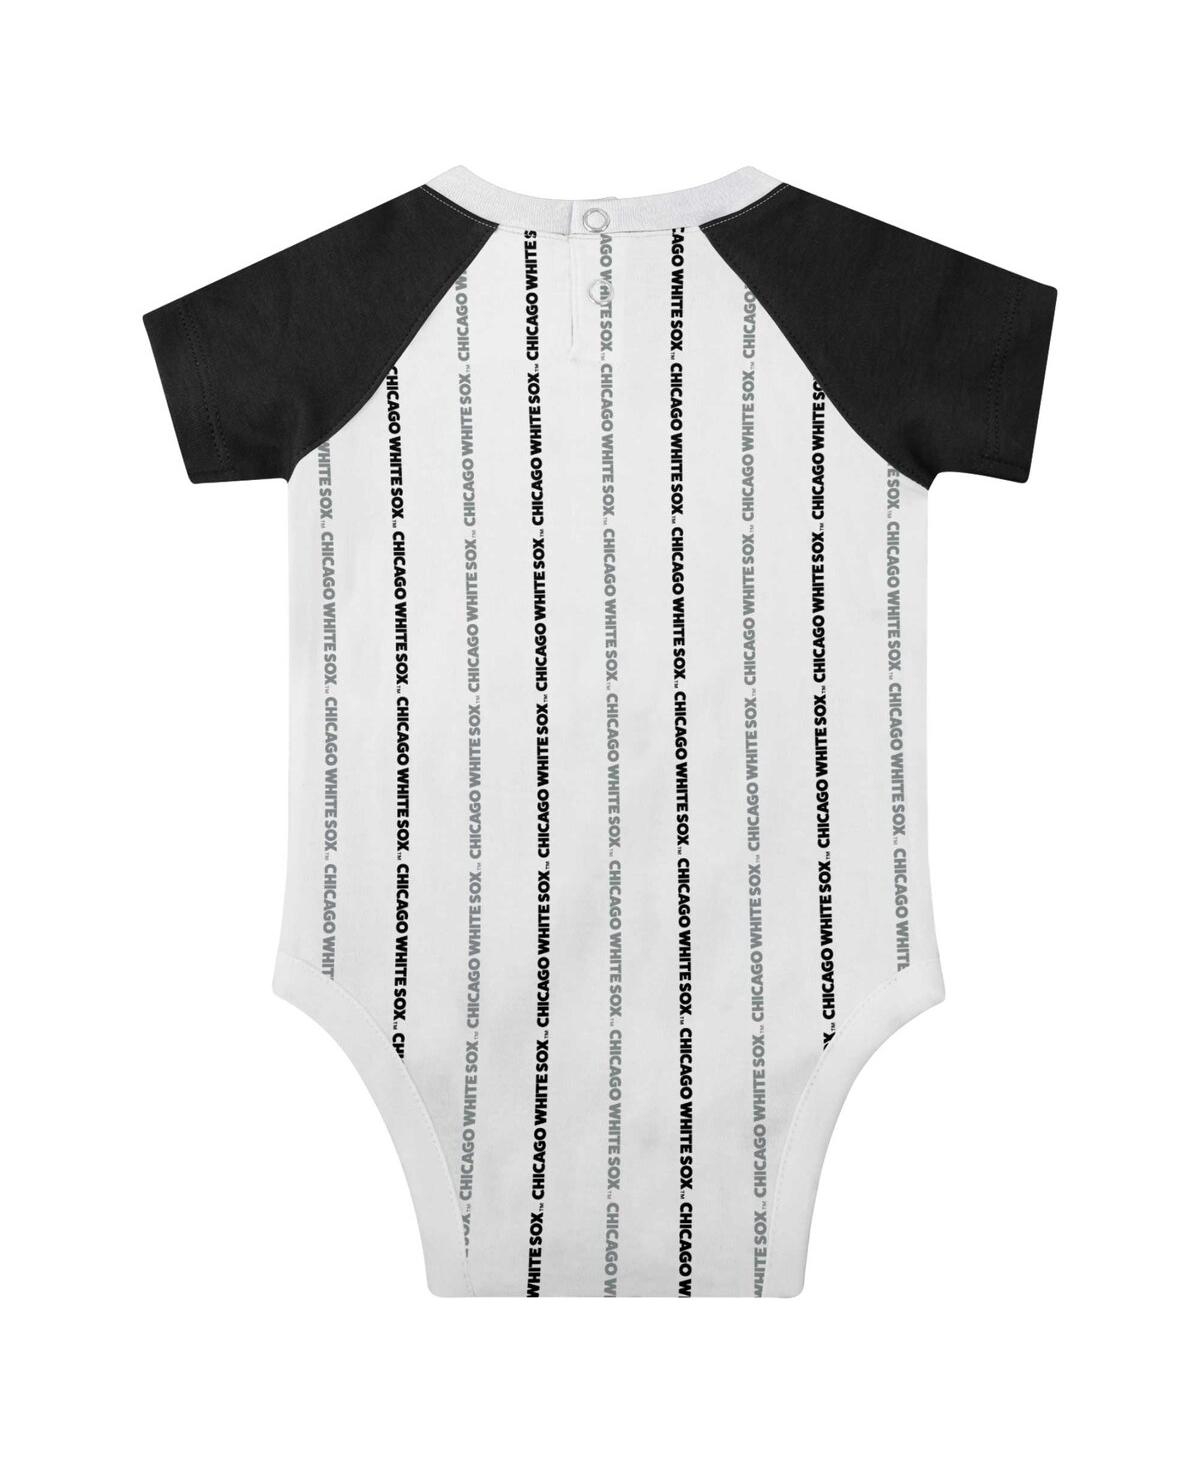 Shop Outerstuff Newborn And Infant Boys And Girls White Chicago White Sox Three-piece Play Ball Raglan Bodysuit, Boo